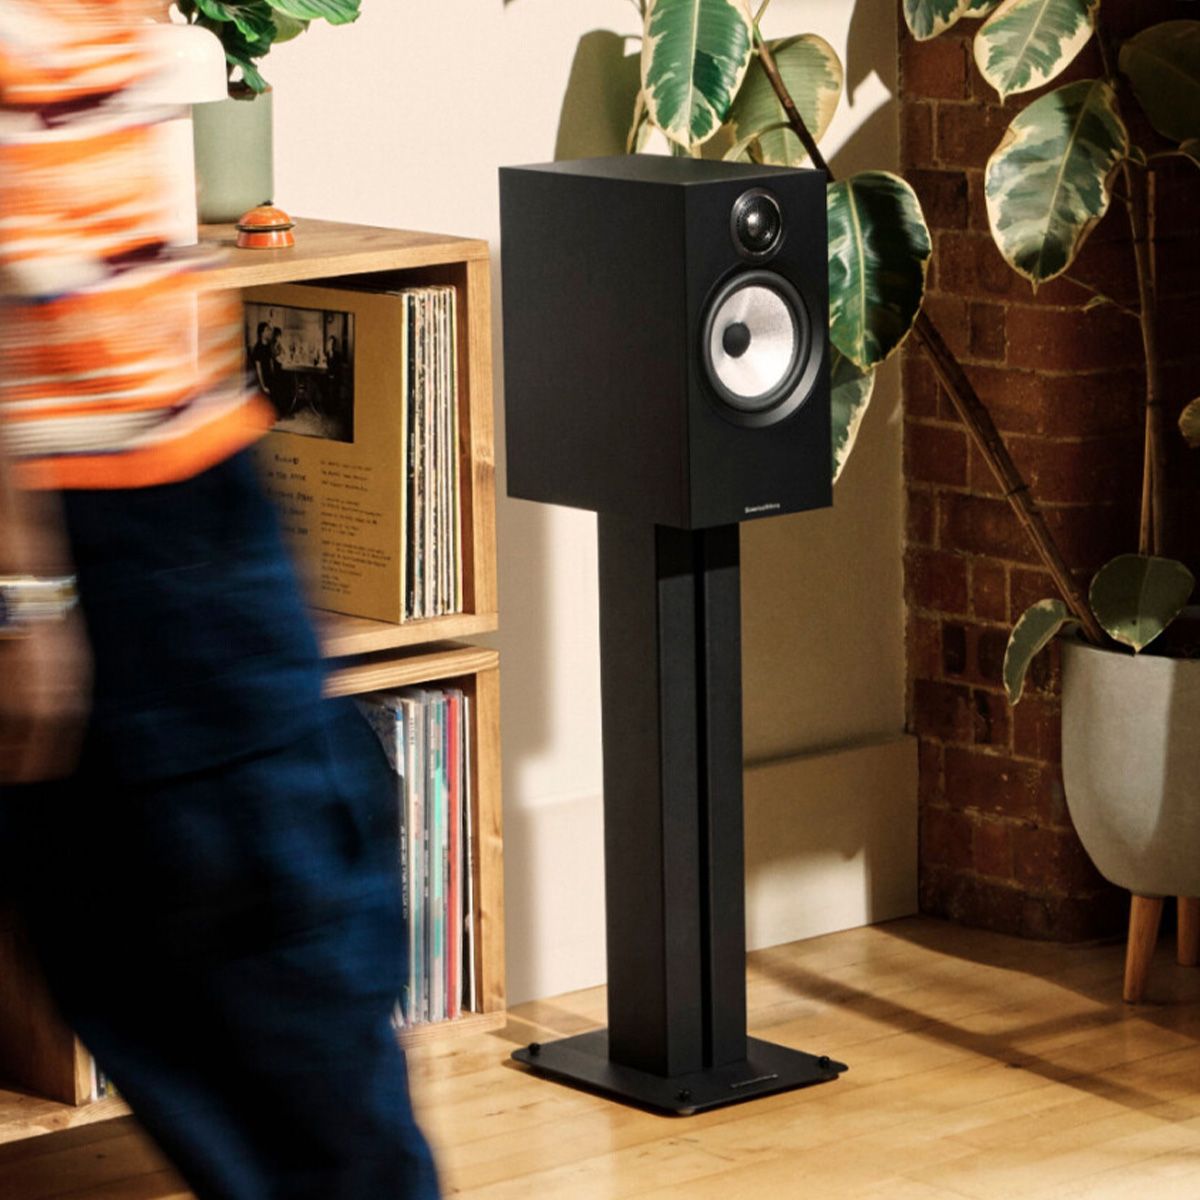 Bowers & Wilkins 607 S3 Bookshelf speaker on stand in a living room beside a media cabinet